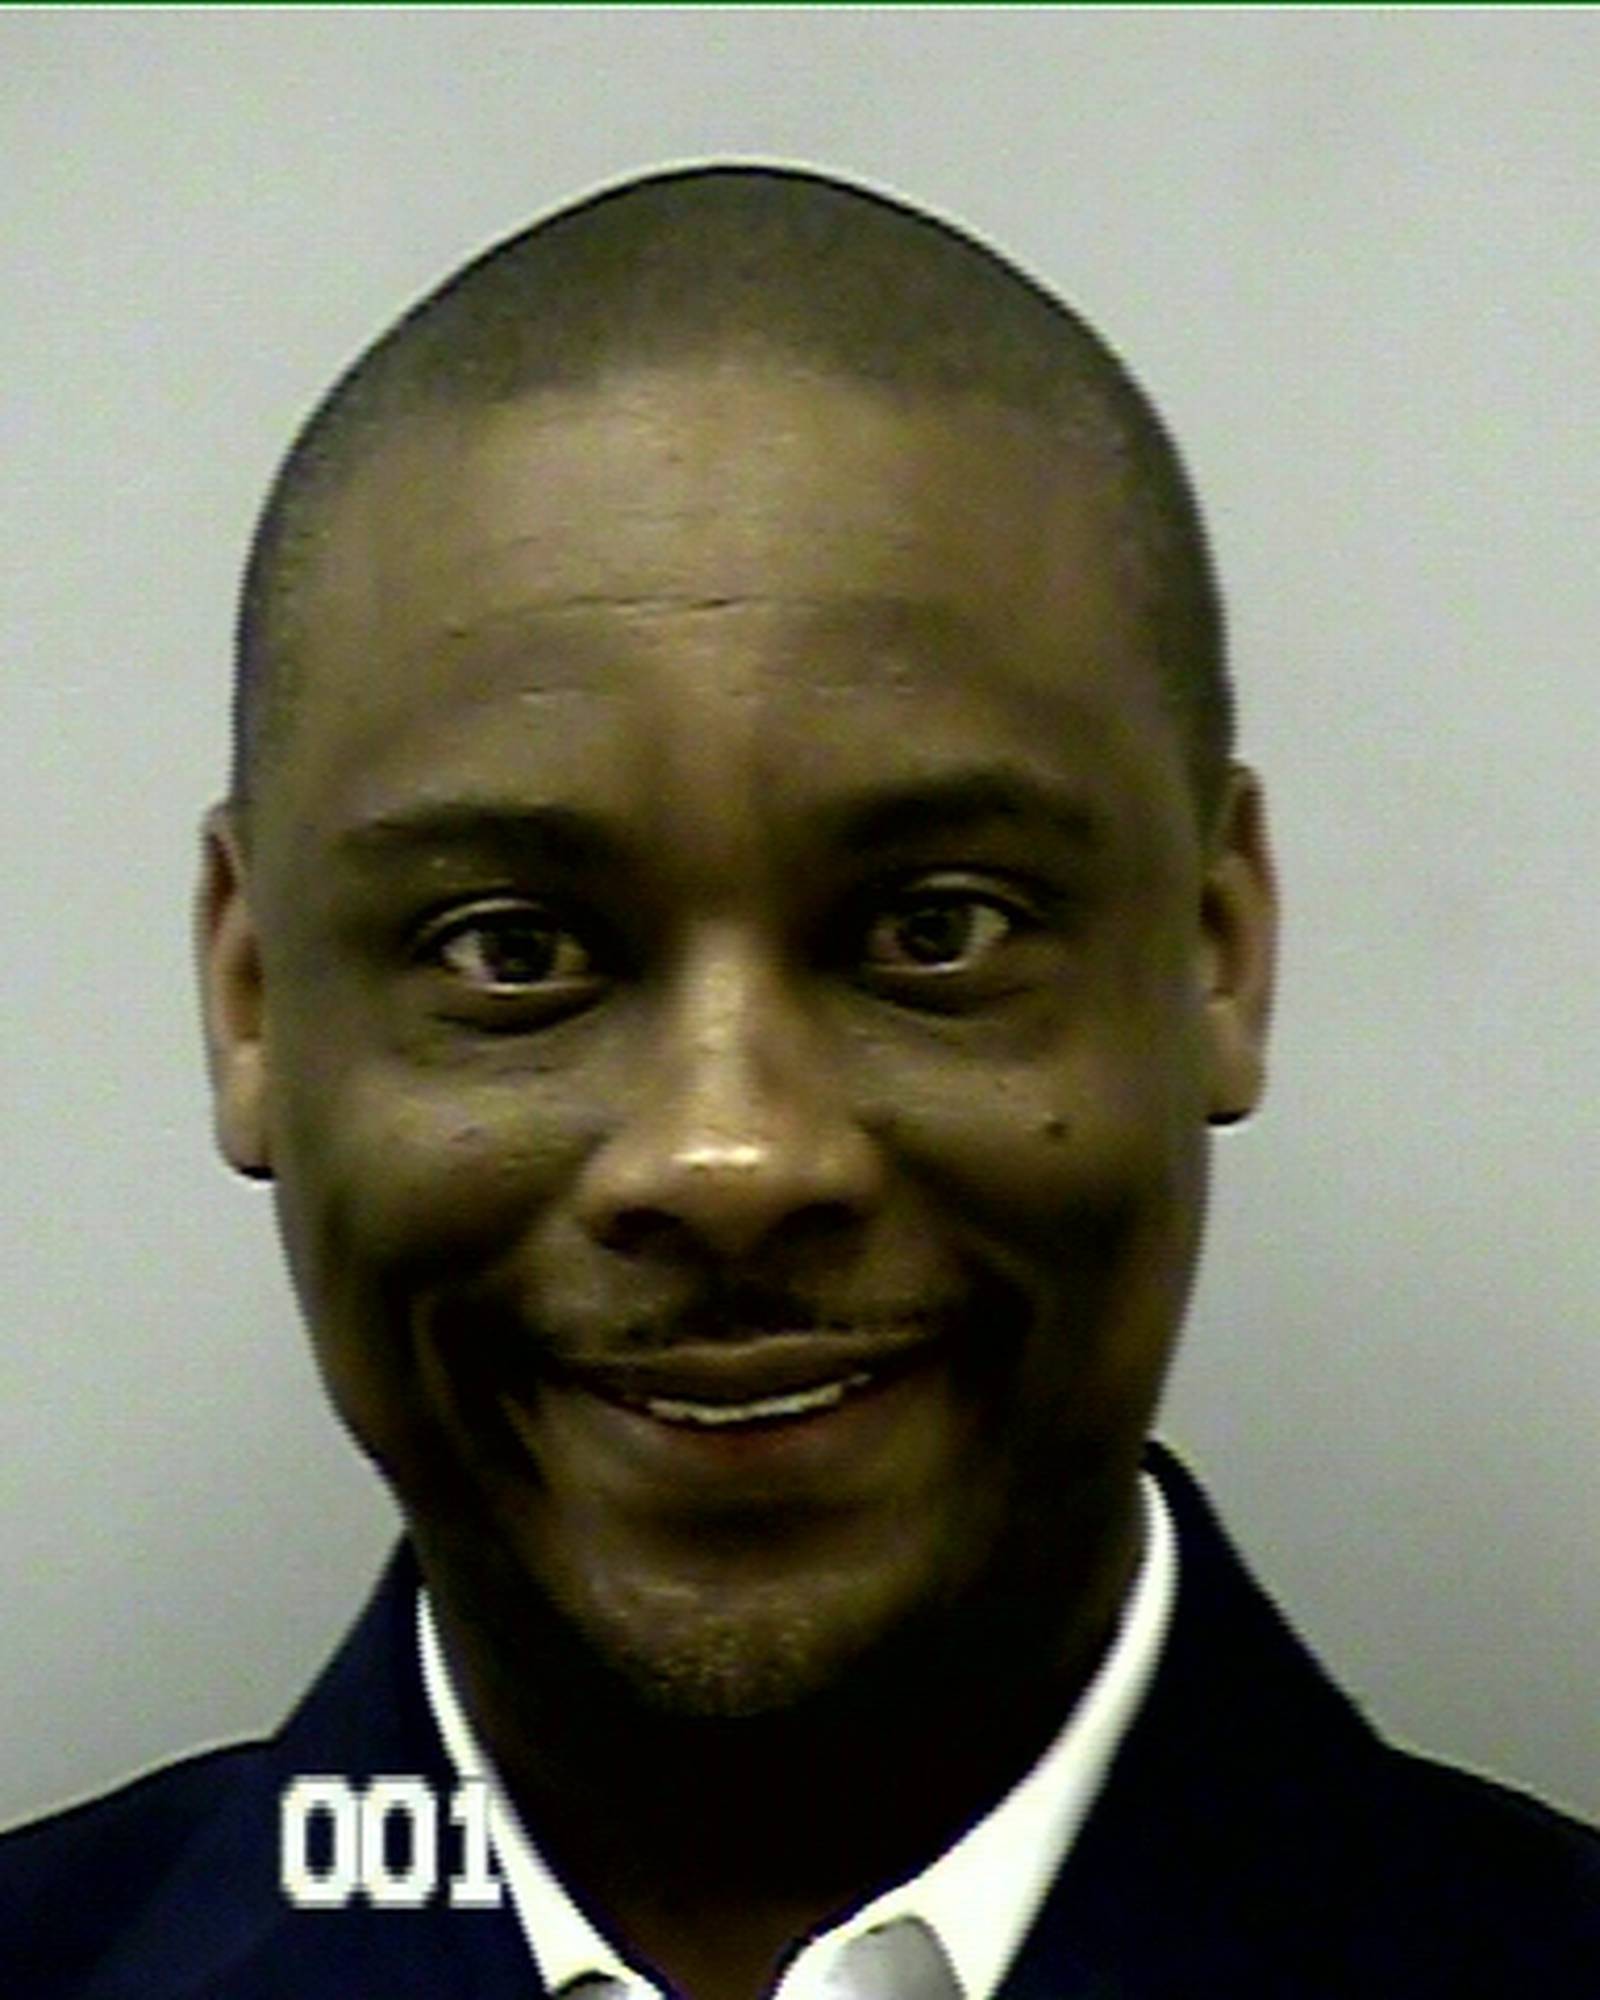 ExClayton sheriff Victor Hill bonds out of jail WSBTV Channel 2